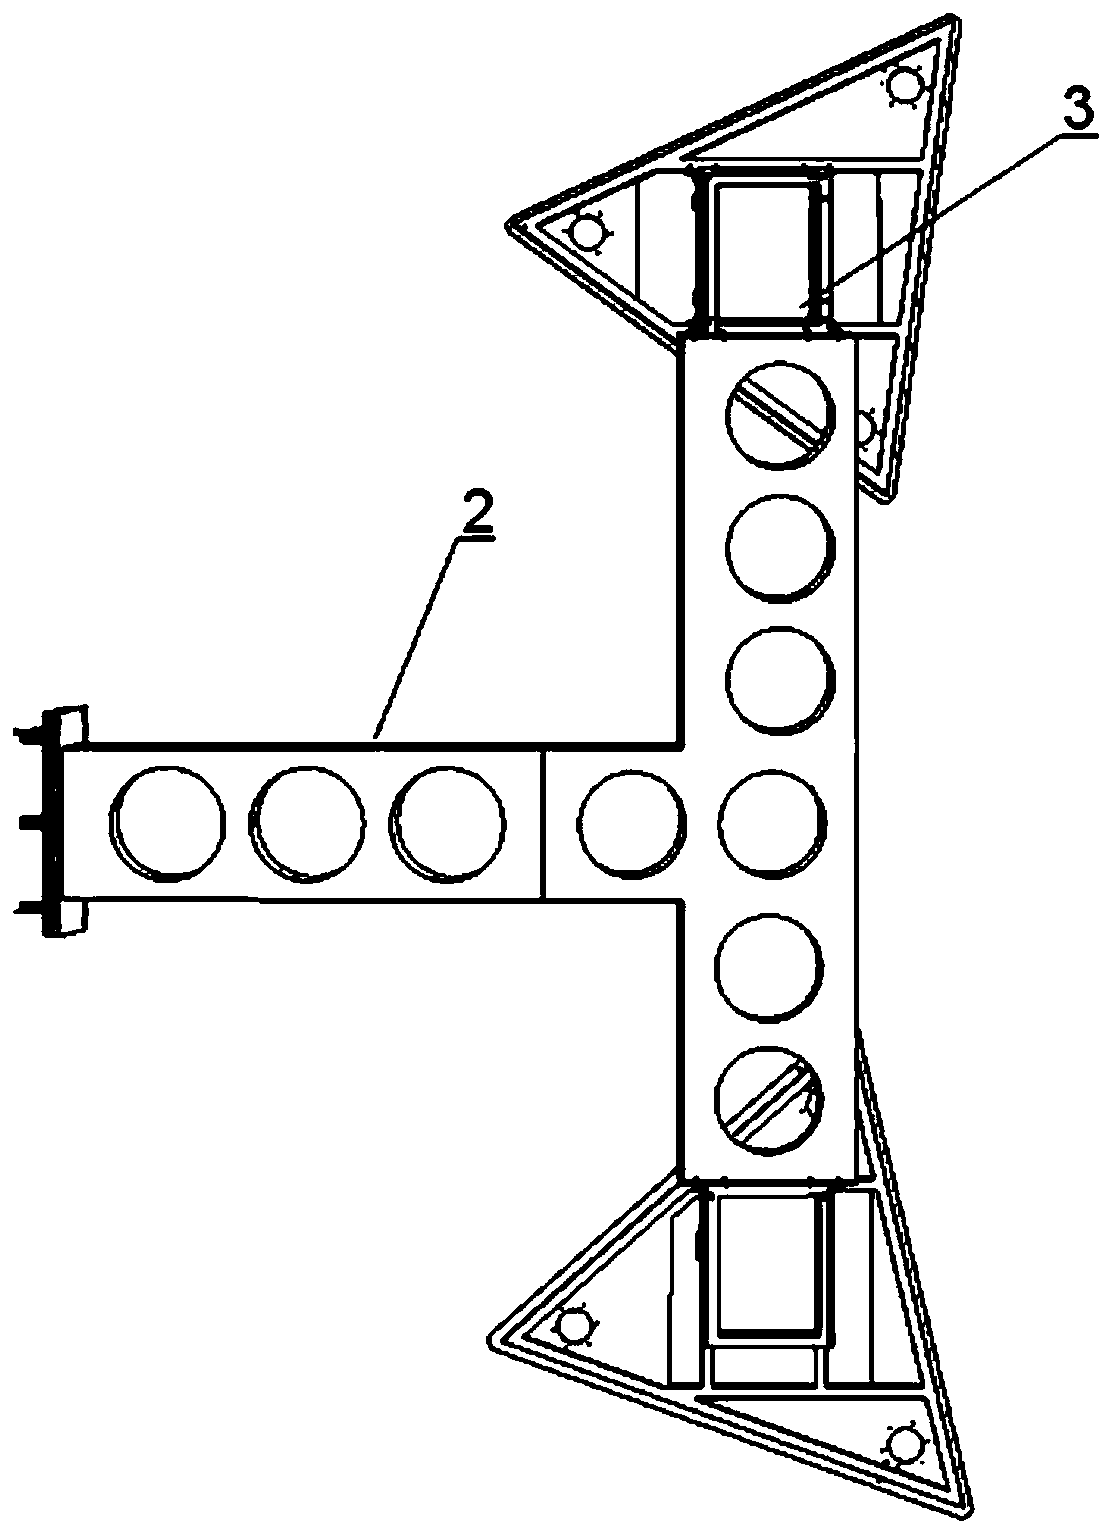 An Overlapping Antenna Expansion Bracket